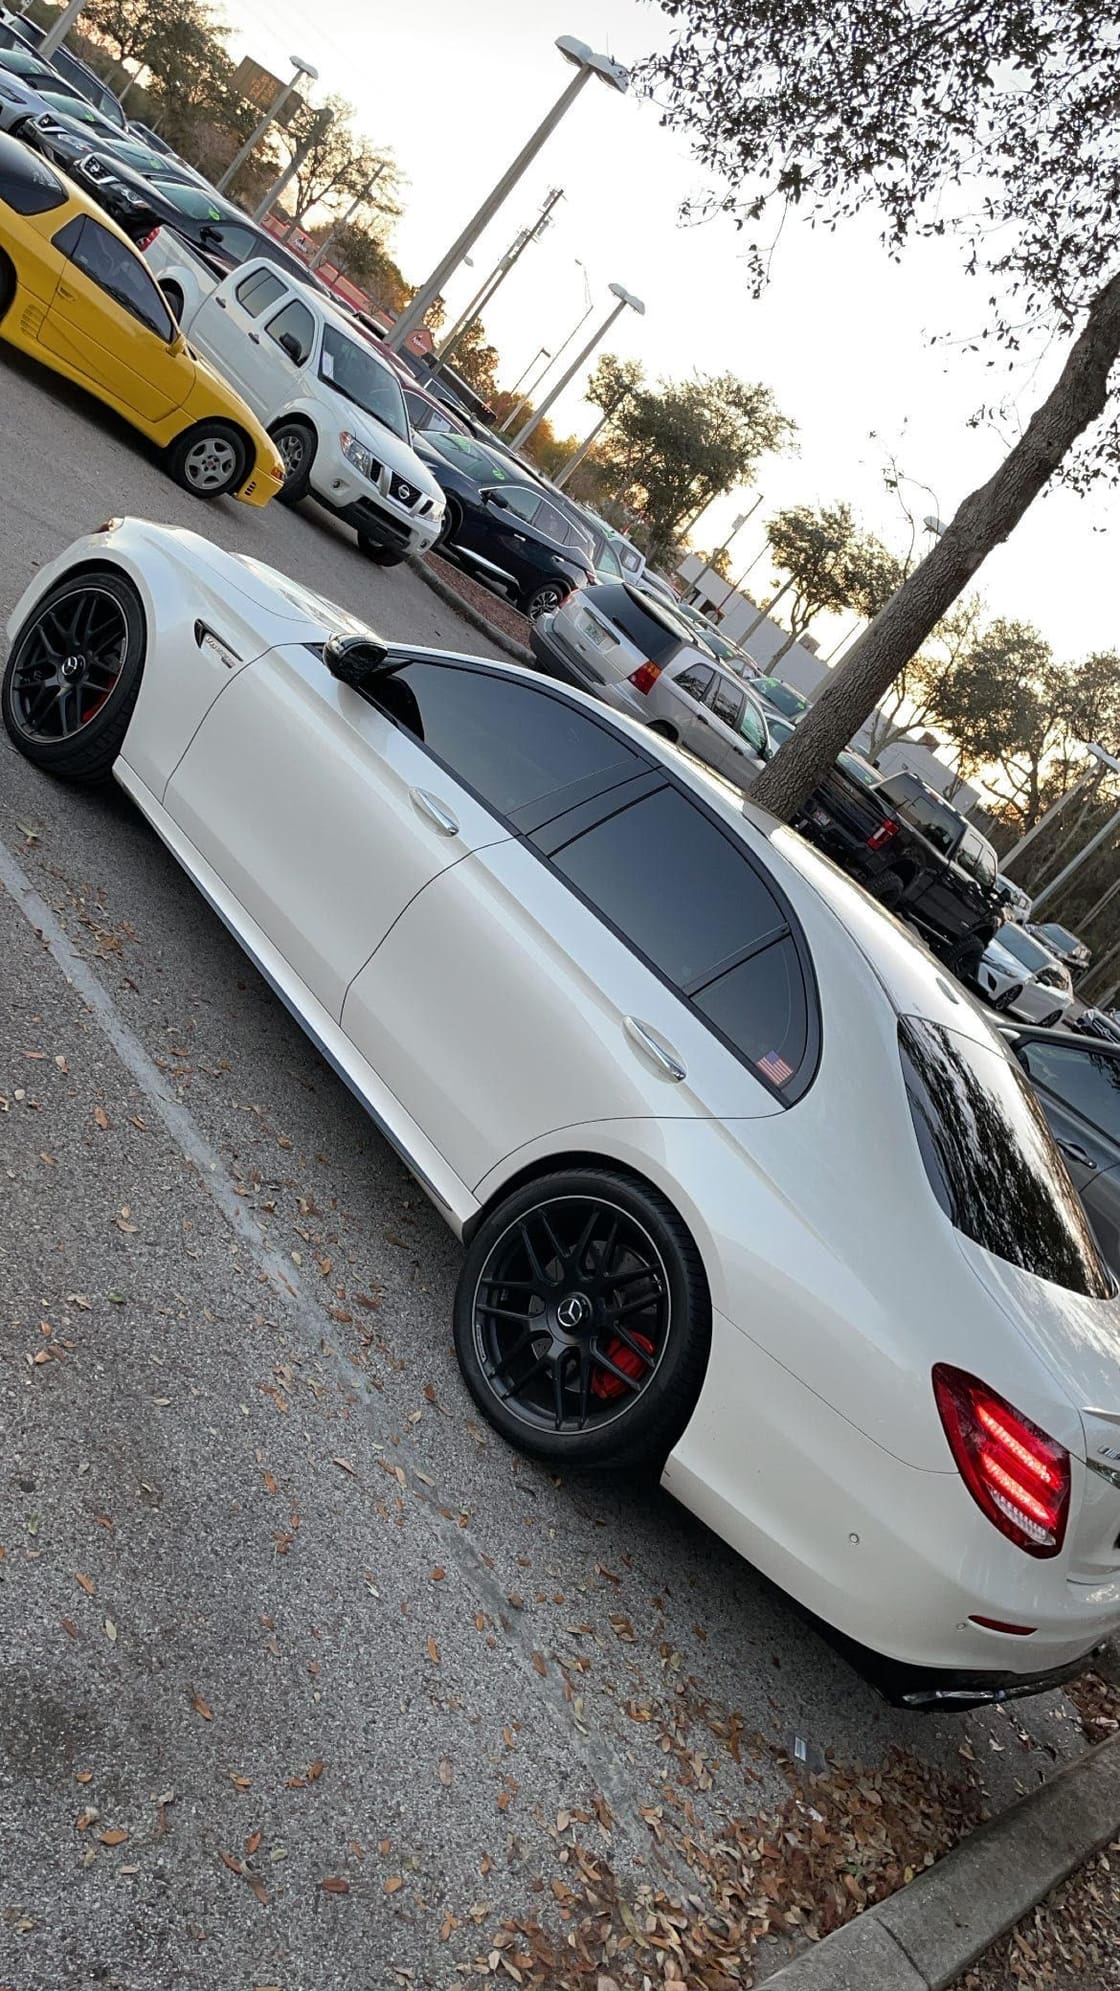 2018 Mercedes-Benz E63 AMG S - 2018 MERCEDES BENZ E63S FOR SALE!!! - Used - VIN WDDZF8KB3JA400123 - 31,658 Miles - 8 cyl - AWD - Automatic - Sedan - White - Tampa, FL 33647, United States